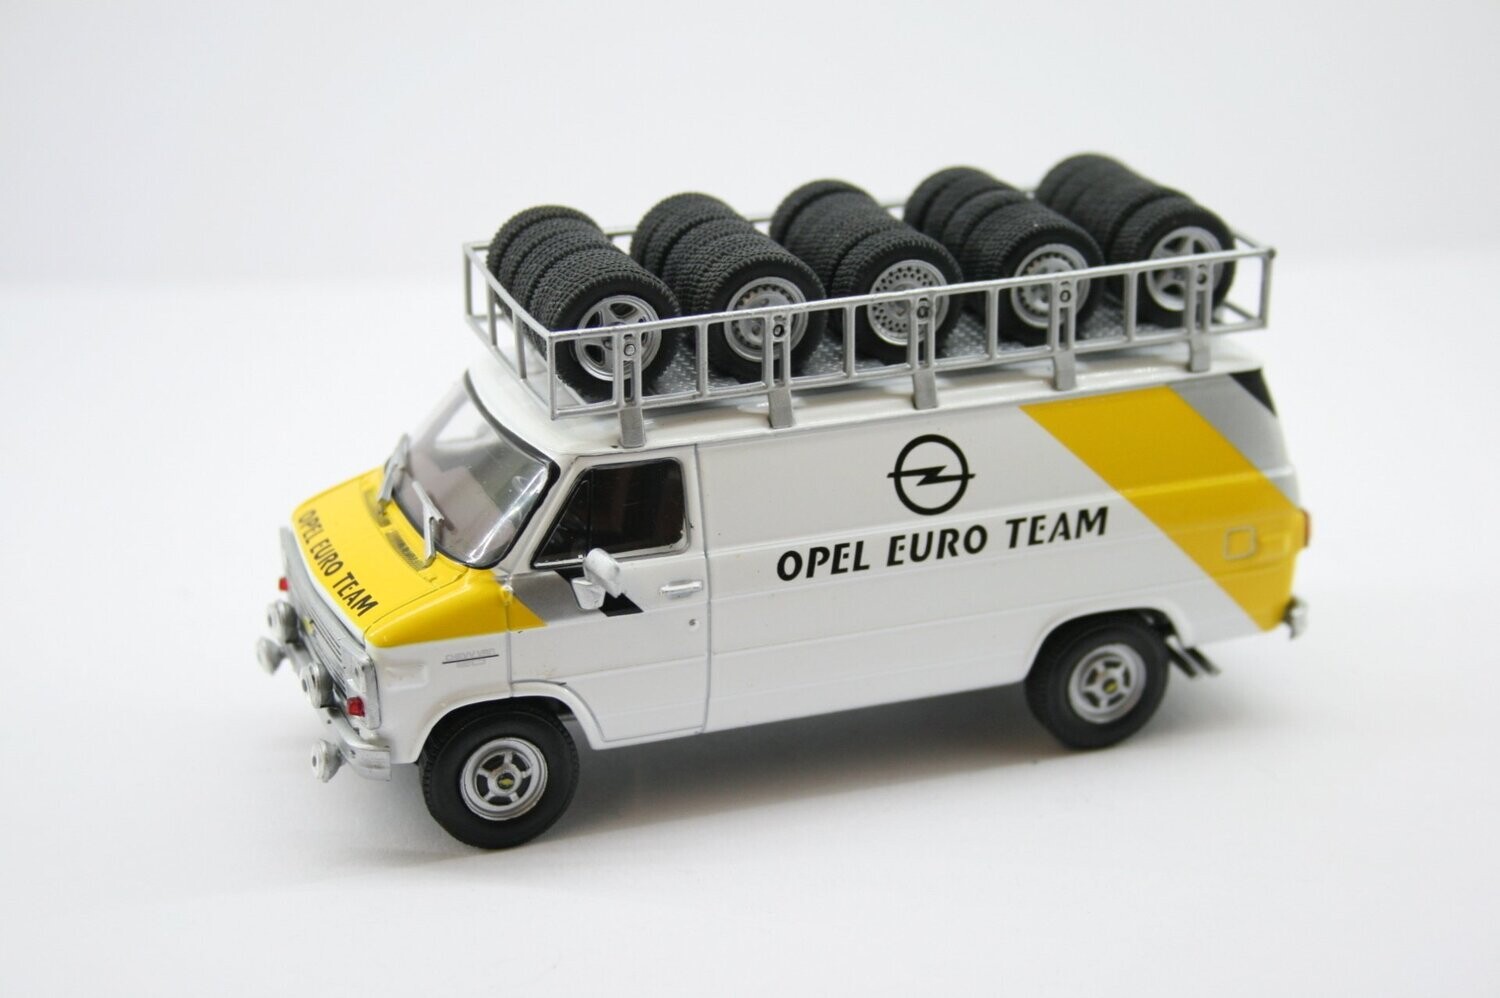 Chevrolet G-Series Van, Rothmans Opel Rally Team, Rothmans,
Assistance with roof rack and wheels, 1983